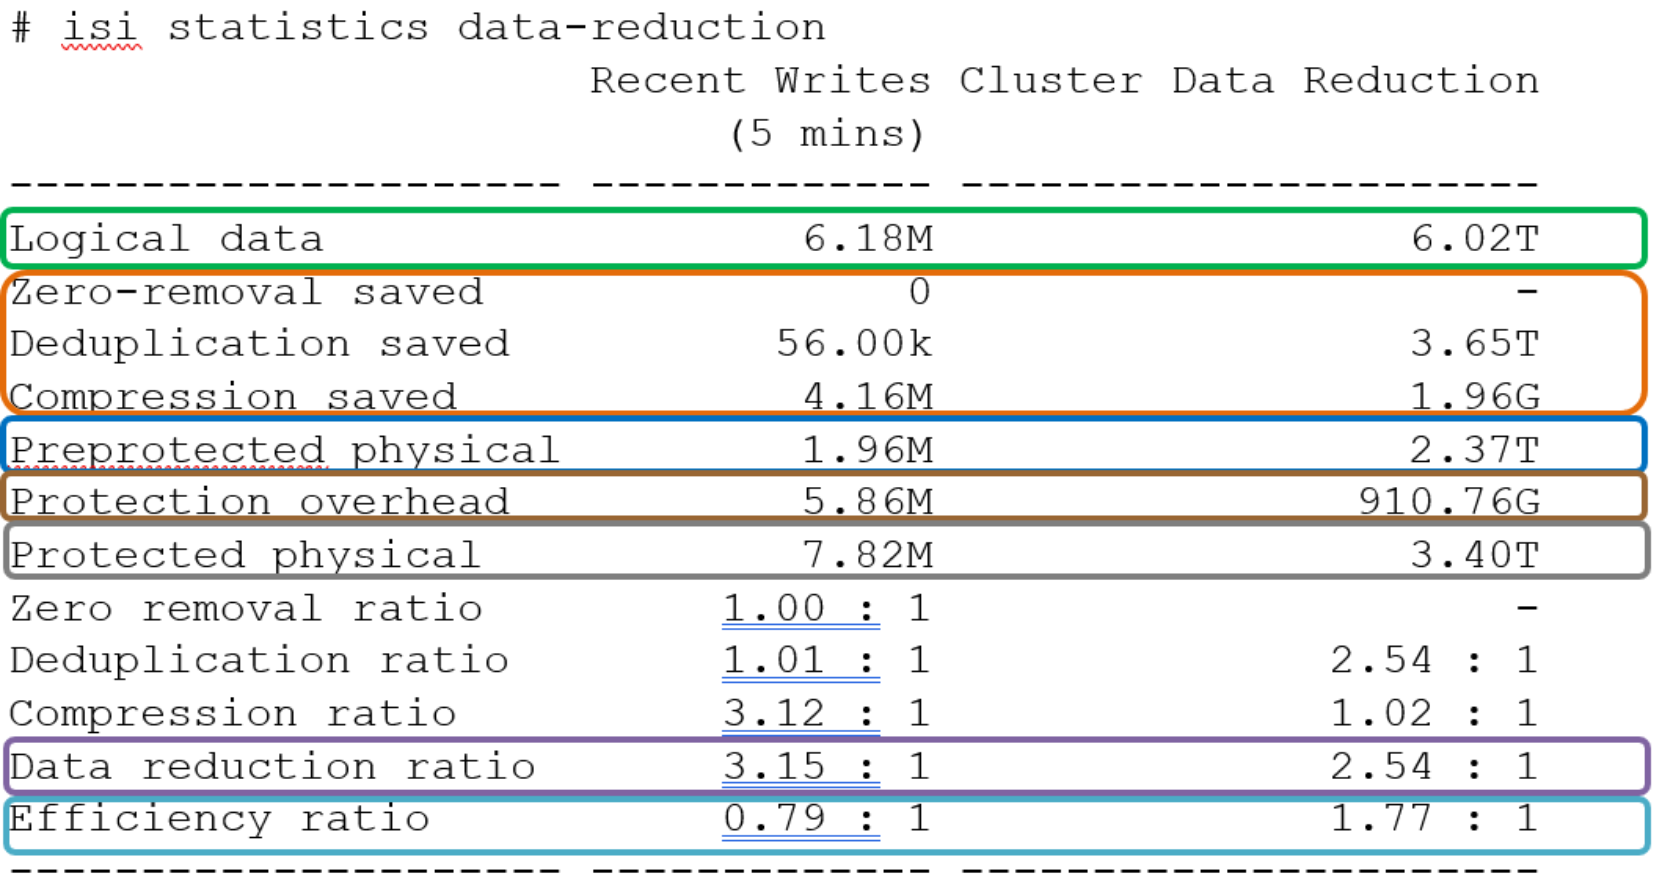 Example output from the ‘isi statistics data-reduction’ CLI command.